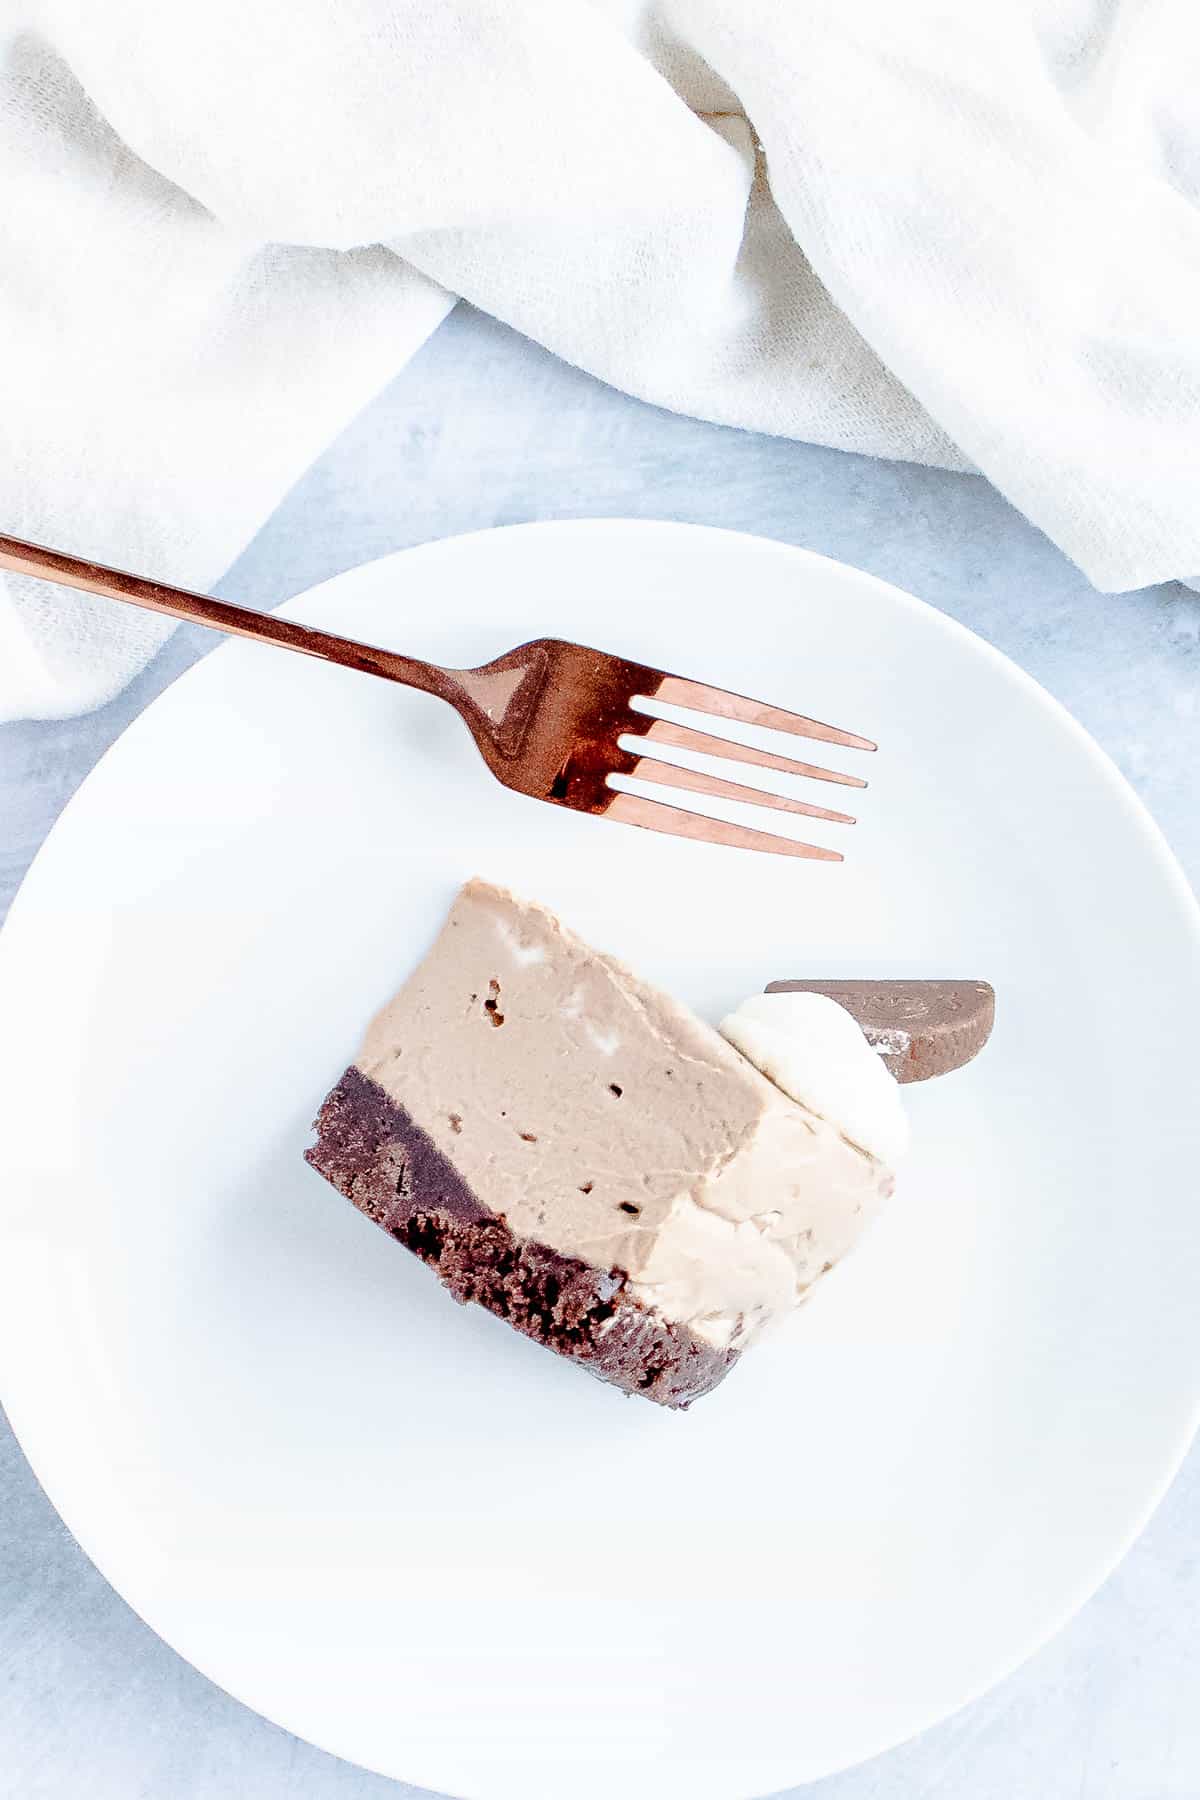 Slice of no-bake chocolate cheesecake on a white plate with a fork next to it